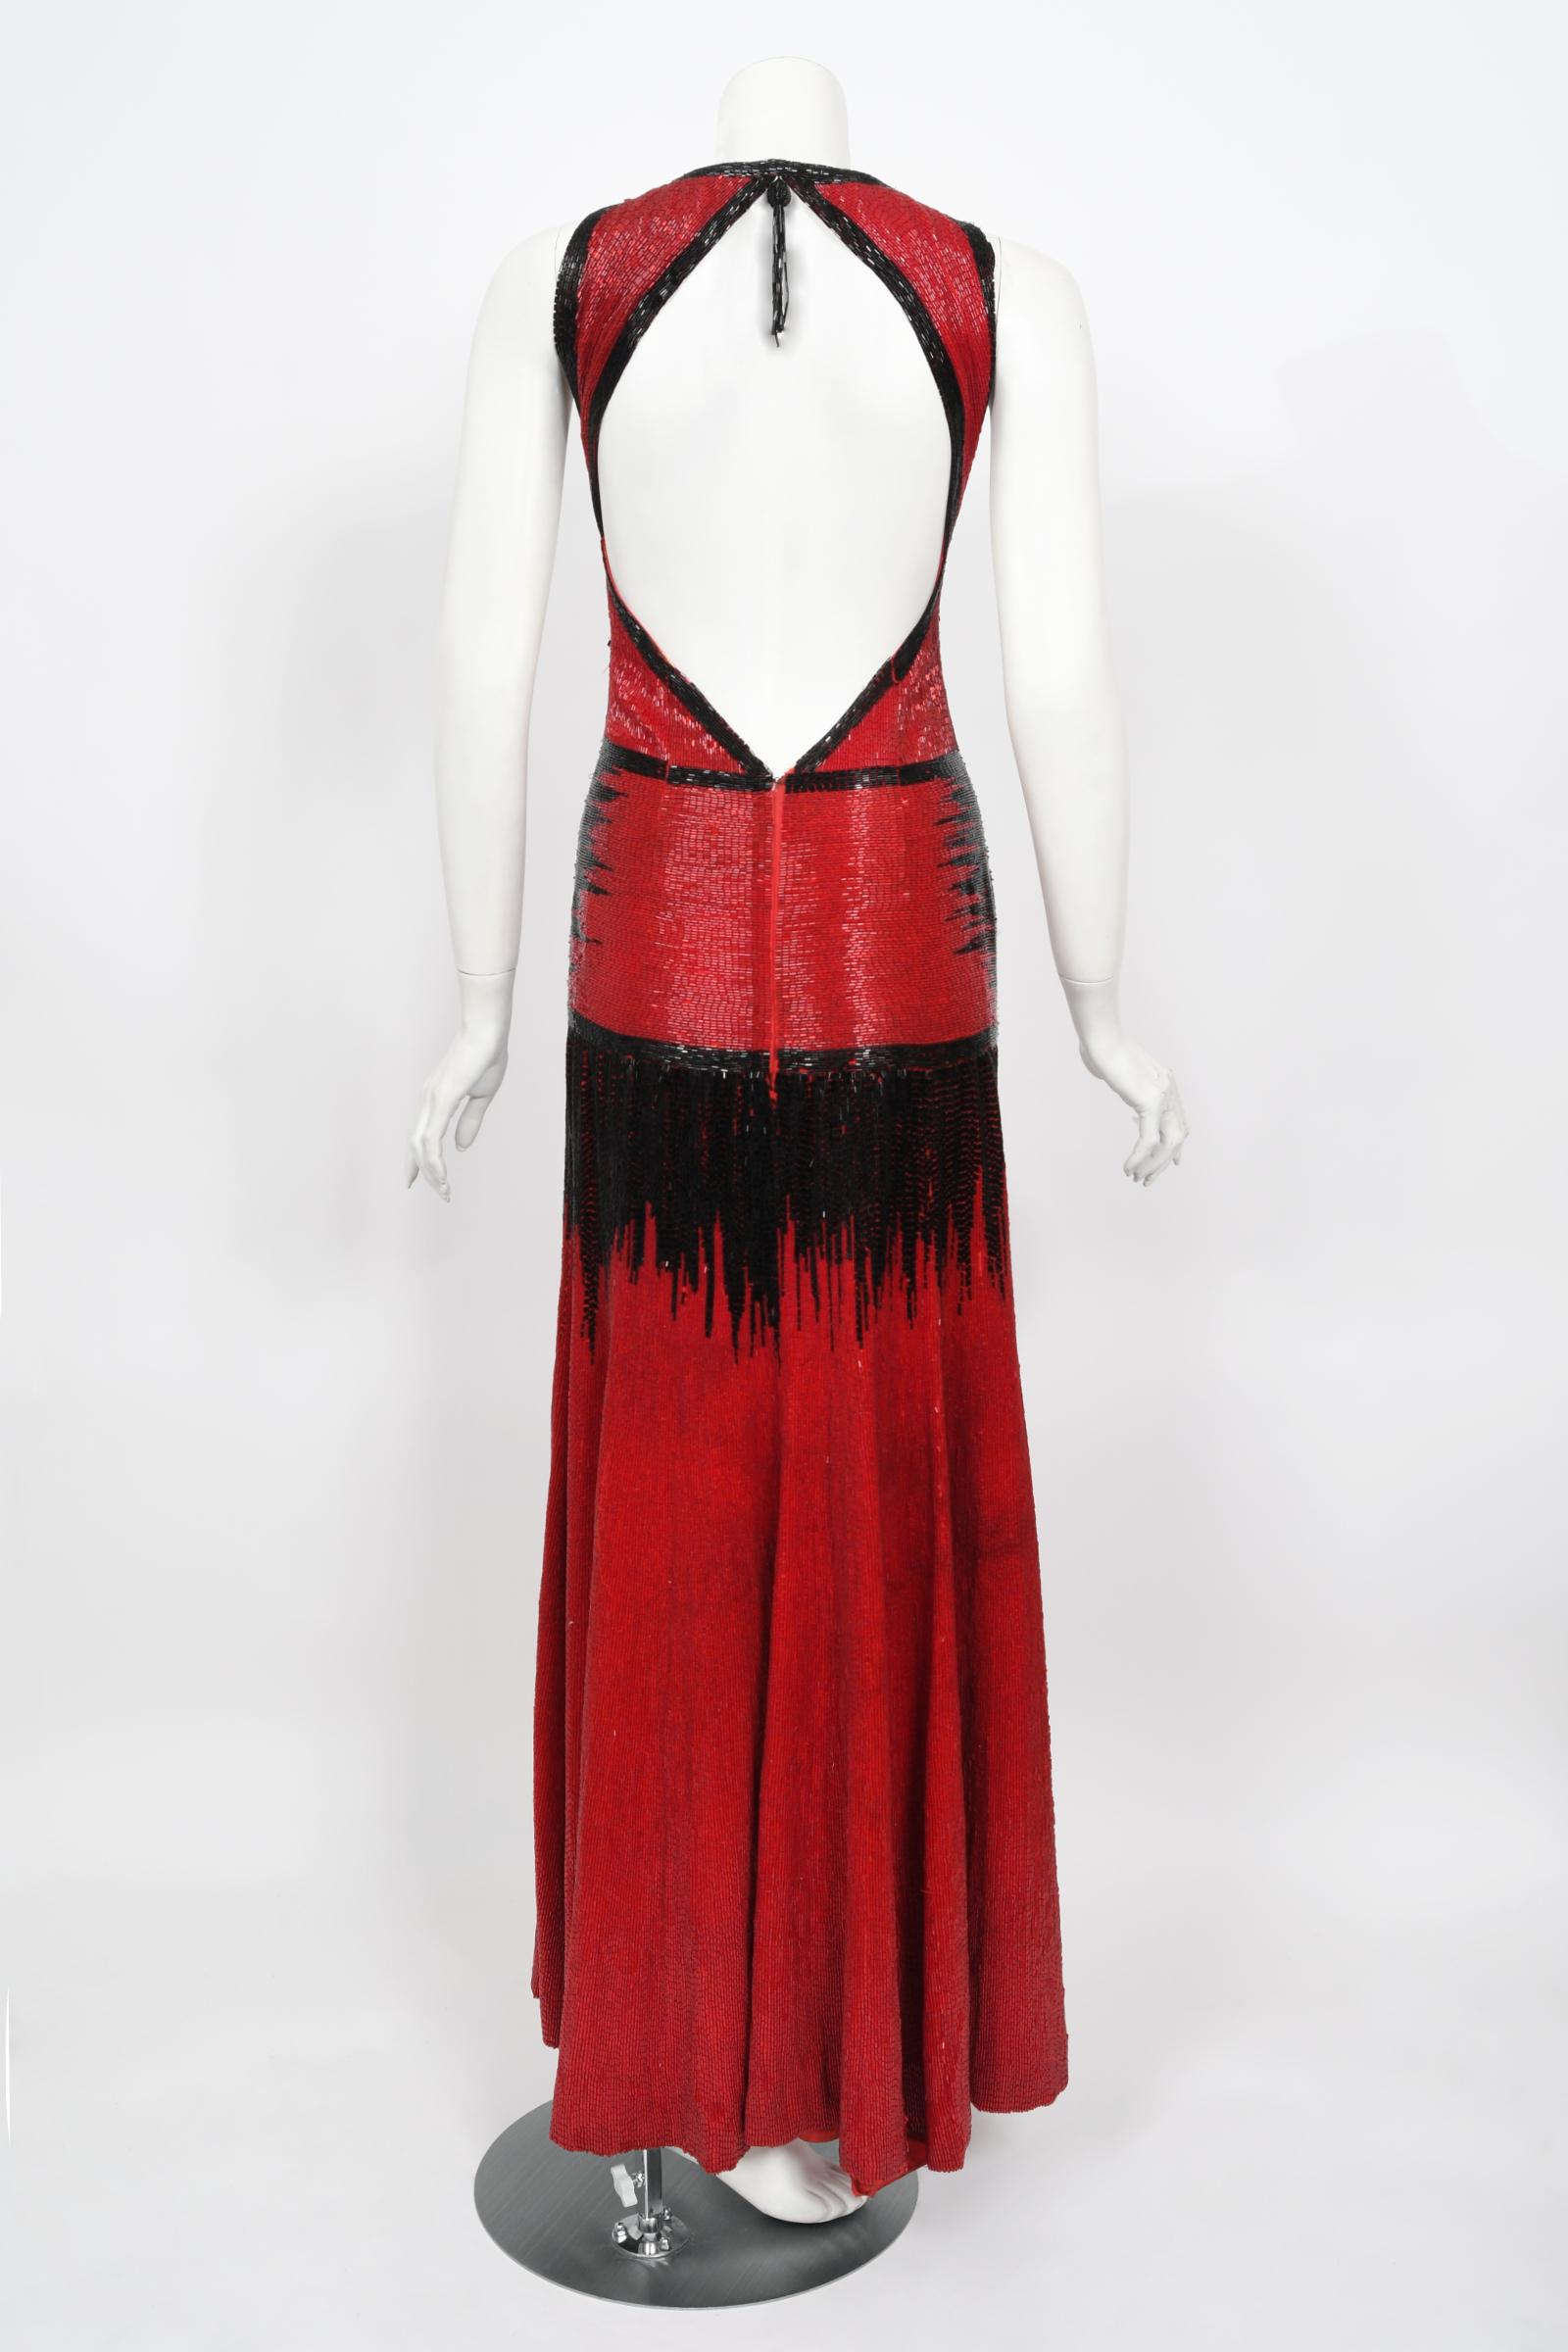 Iconic 1970s Museum Quality Fully Beaded Couture Backless Bias Cut Trained Gown  For Sale 8